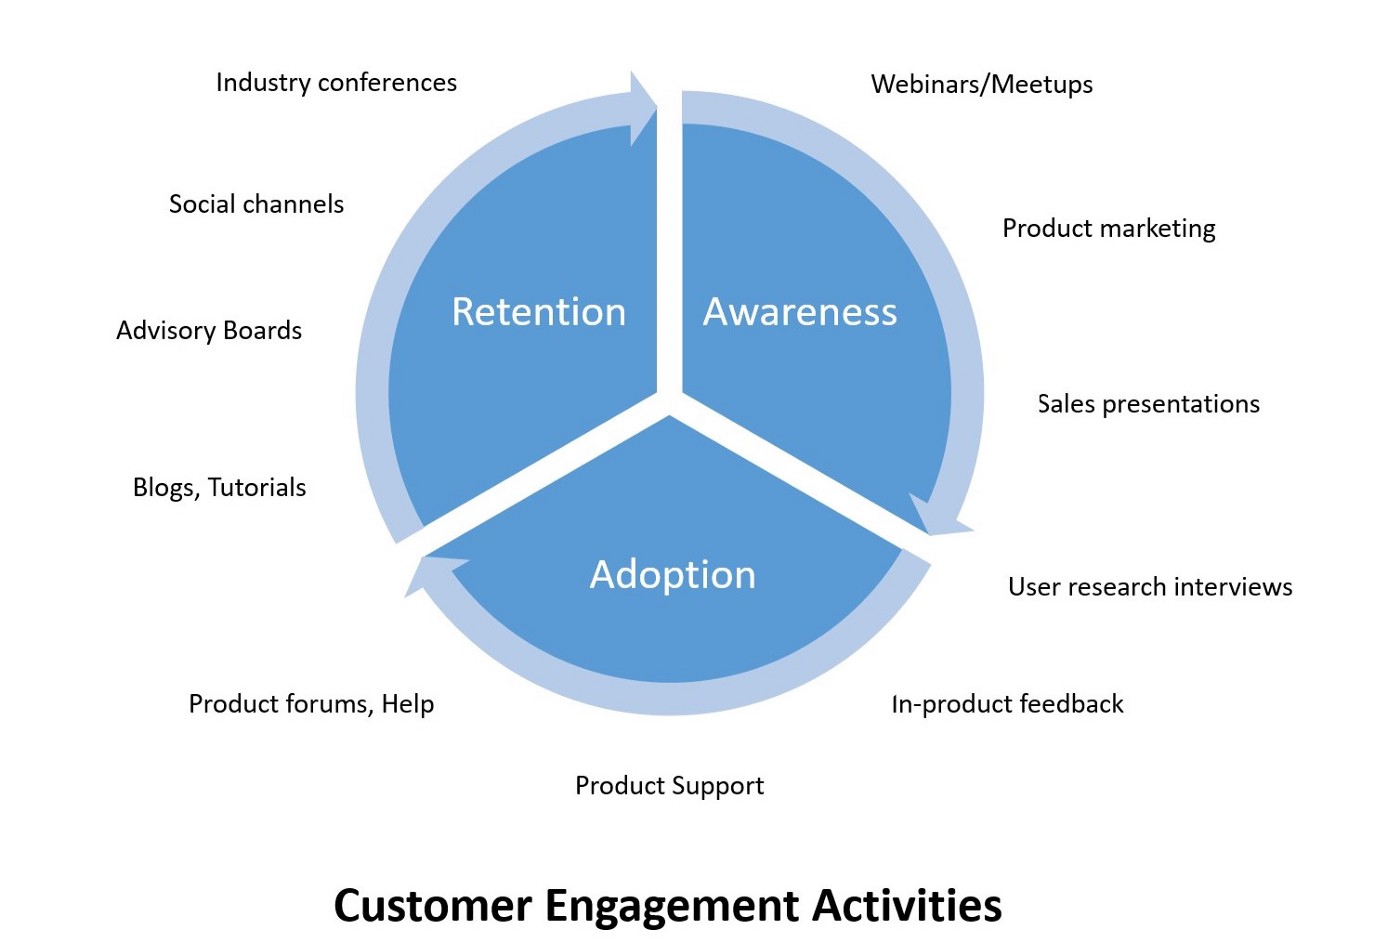 Pie chart outlining different consumer engagement activities: Industry conferences, social channels, advisory boards, blogs, tutorials, product forums, help, product support, webinars/meetups, product marketing, sales presentations, user research interviews, in-product feedback, product support 